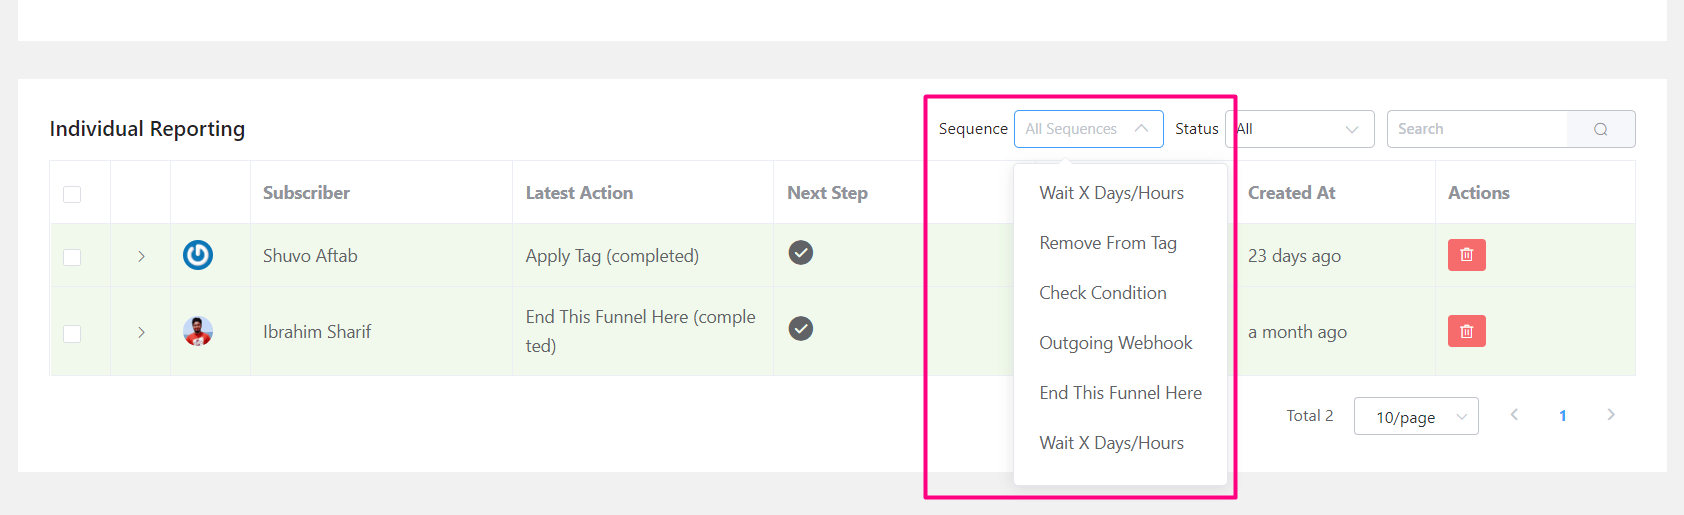 crm automation report filter steps actions